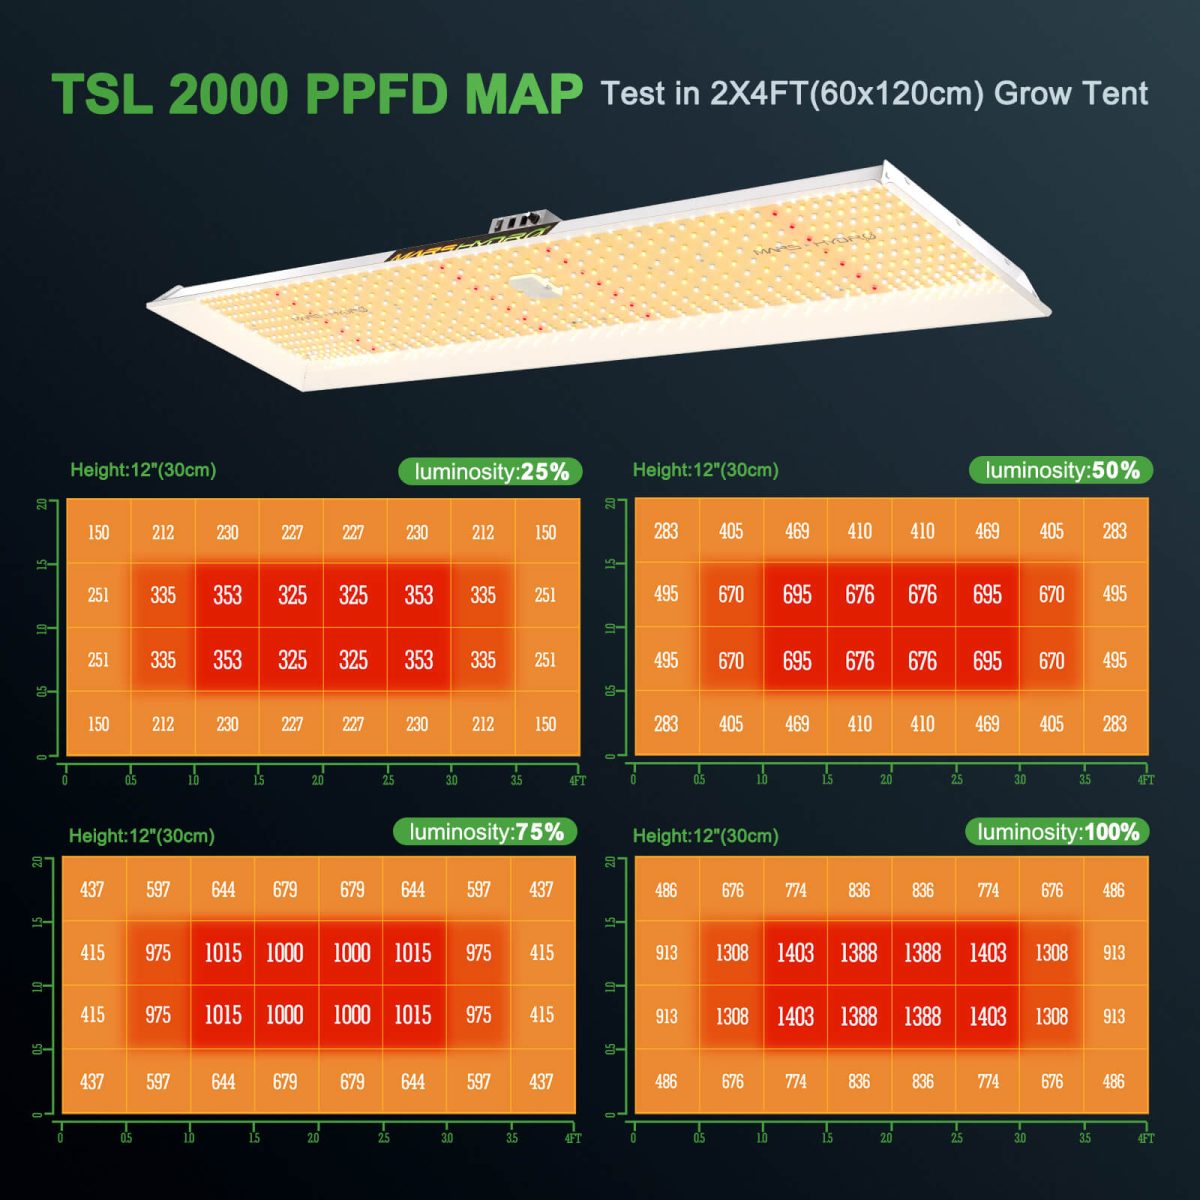 TSL 2000 LED grow ligh PPFD map in 2x4 grow tent, test at 25%, 50%, 75% and 100% luminosity, high PPFD